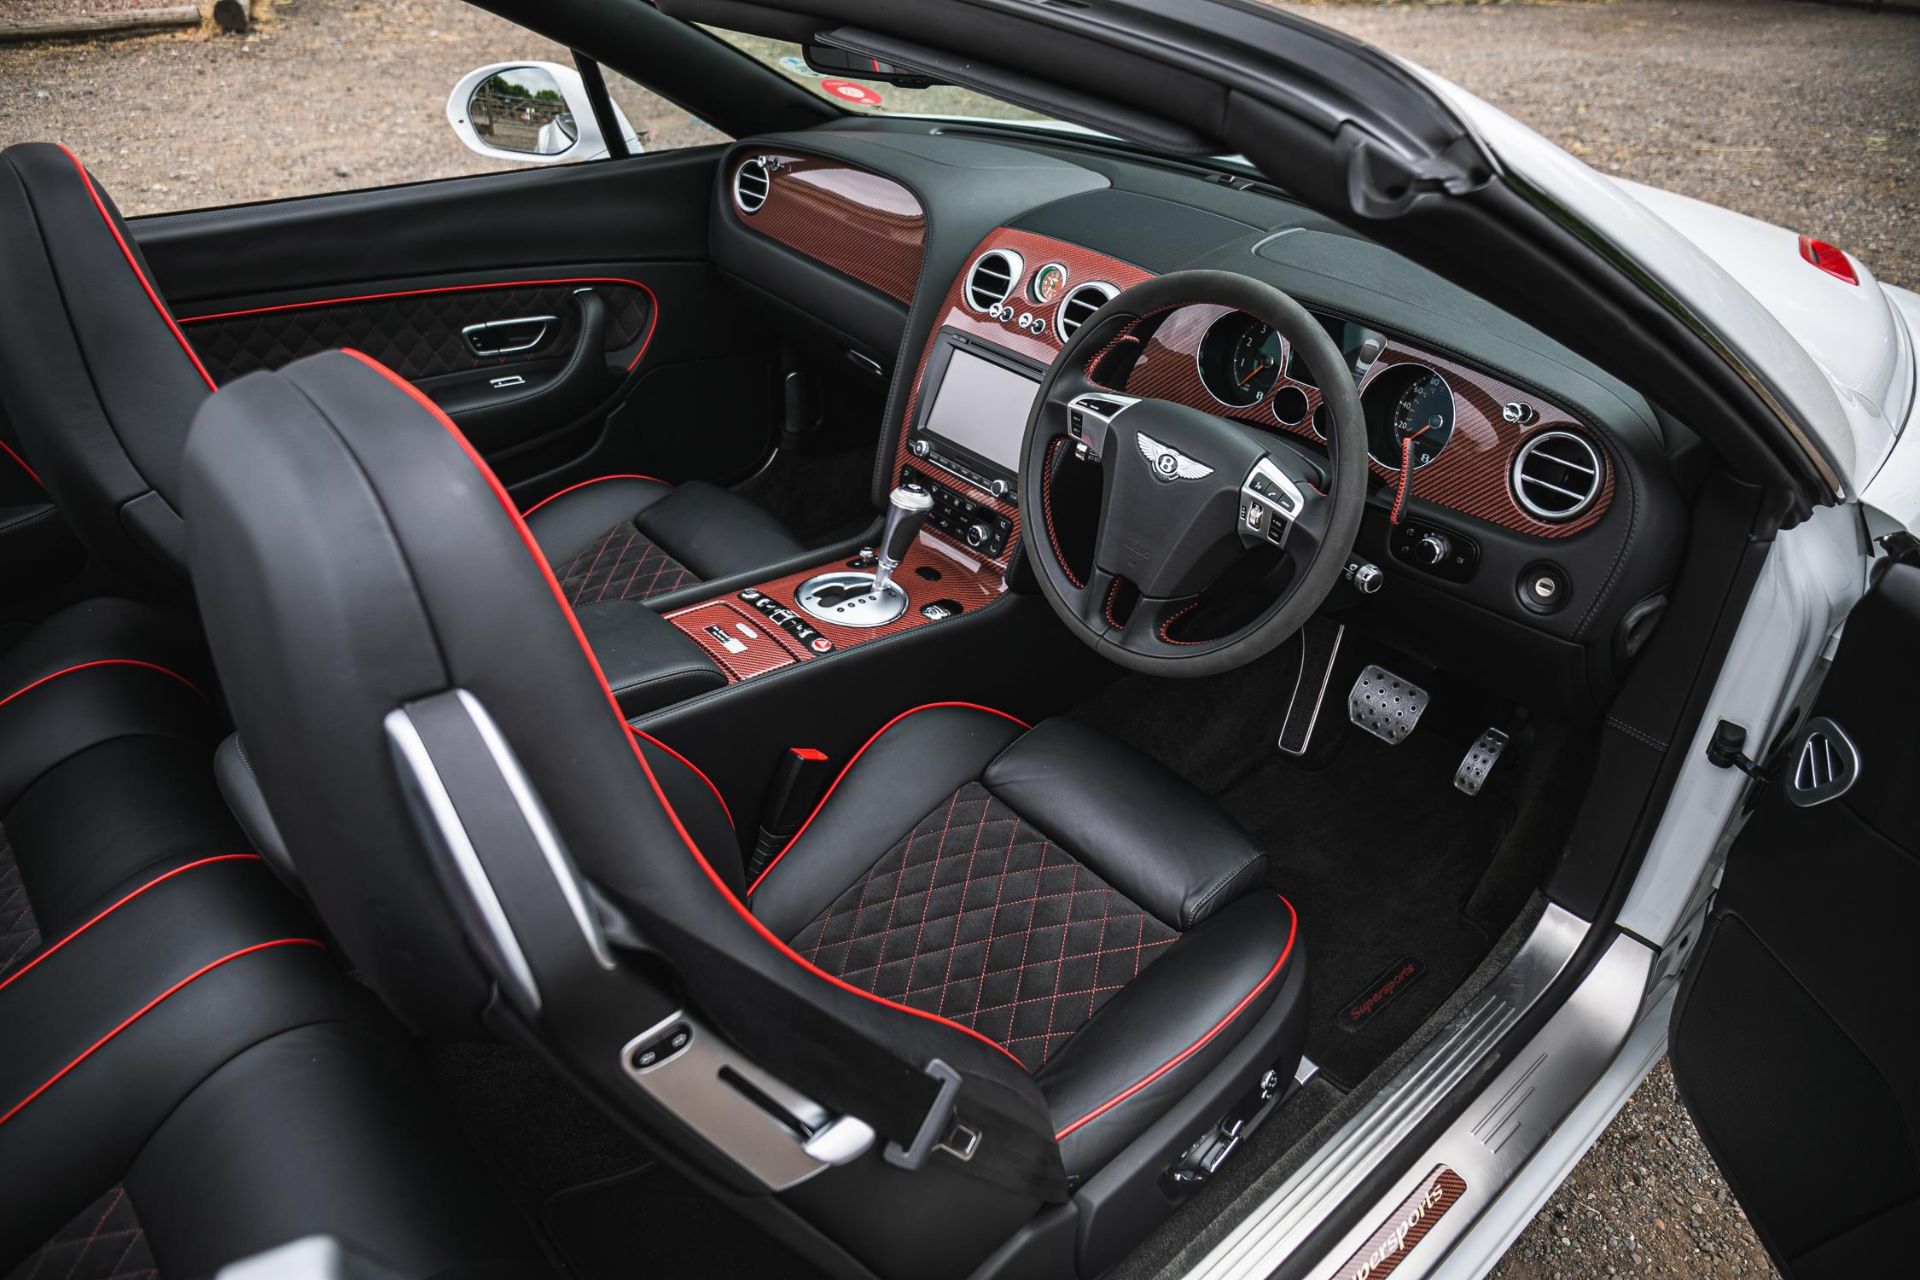 2012 Bentley Continental GTC Supersports Ice Speed Record Edition - Image 2 of 10